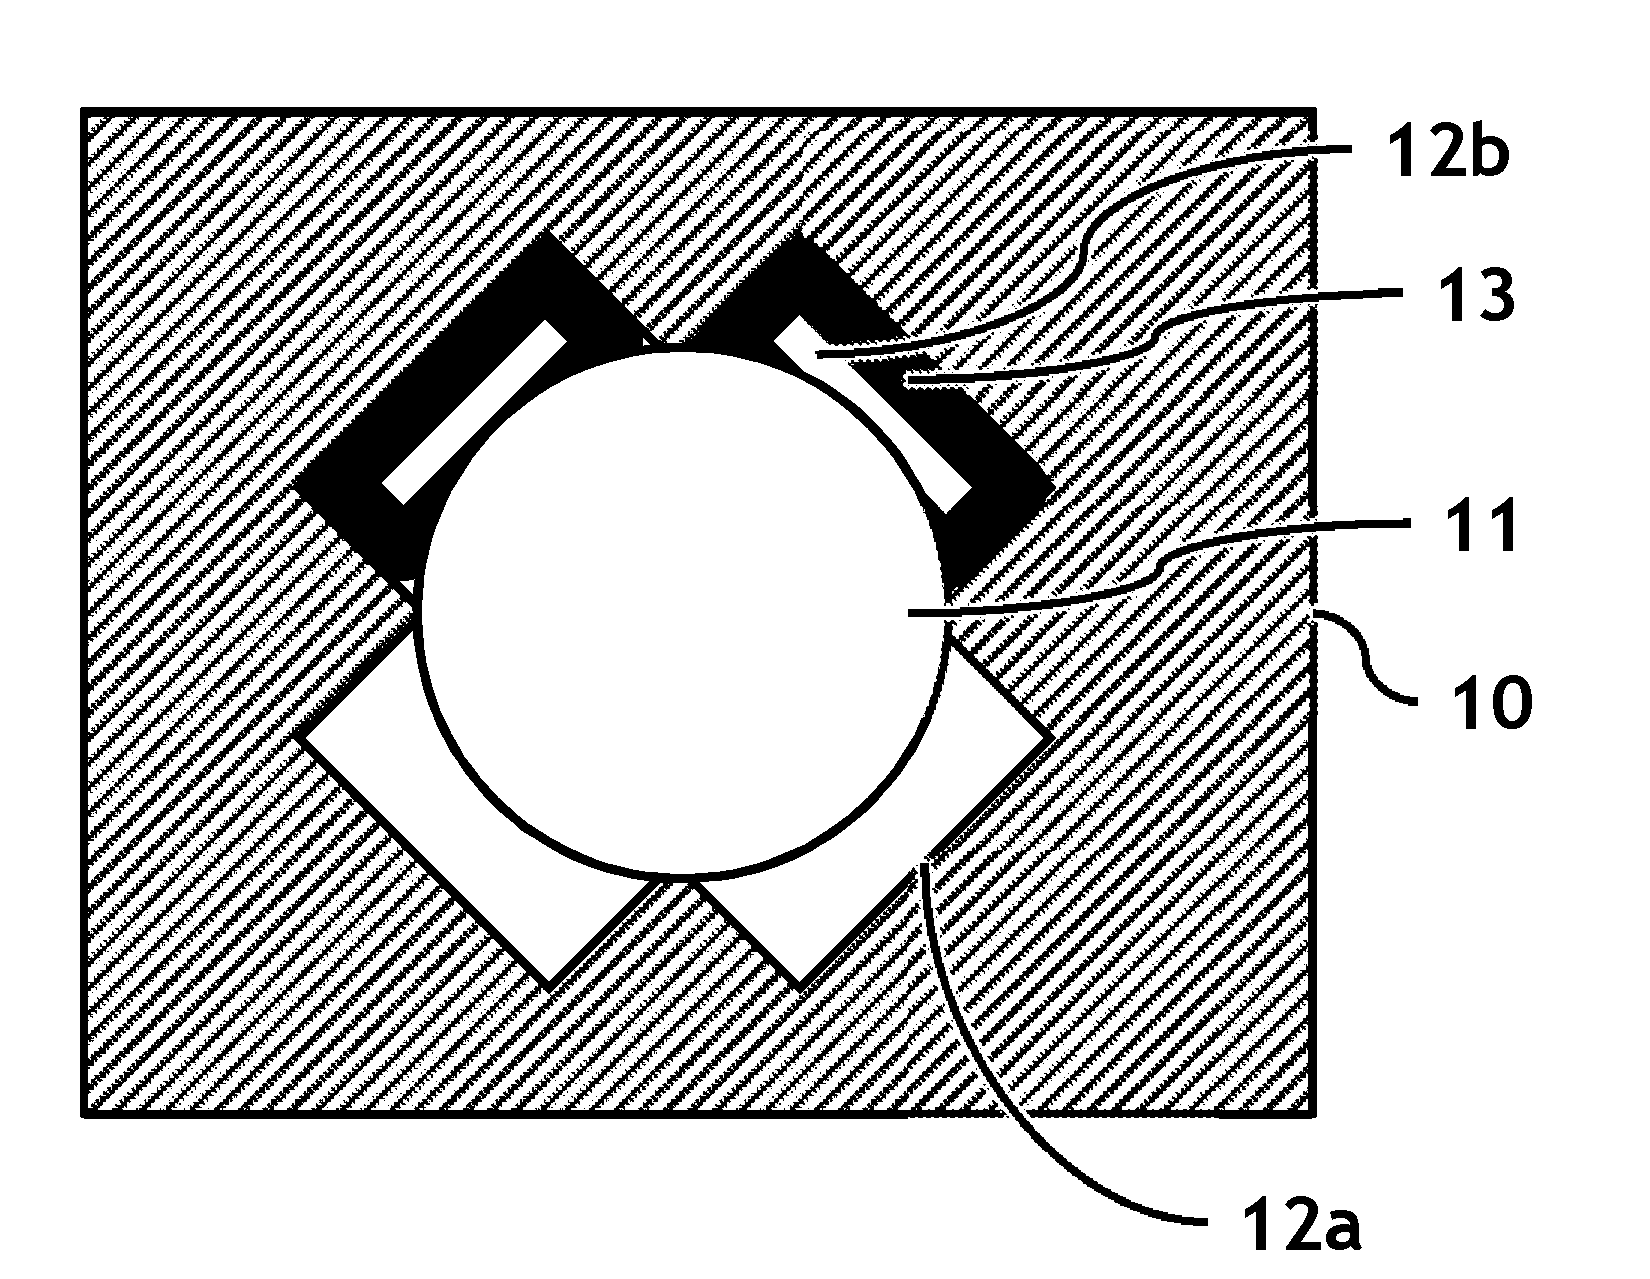 Method for quantitative estimation of fouling of the spacers plates in a steam generator